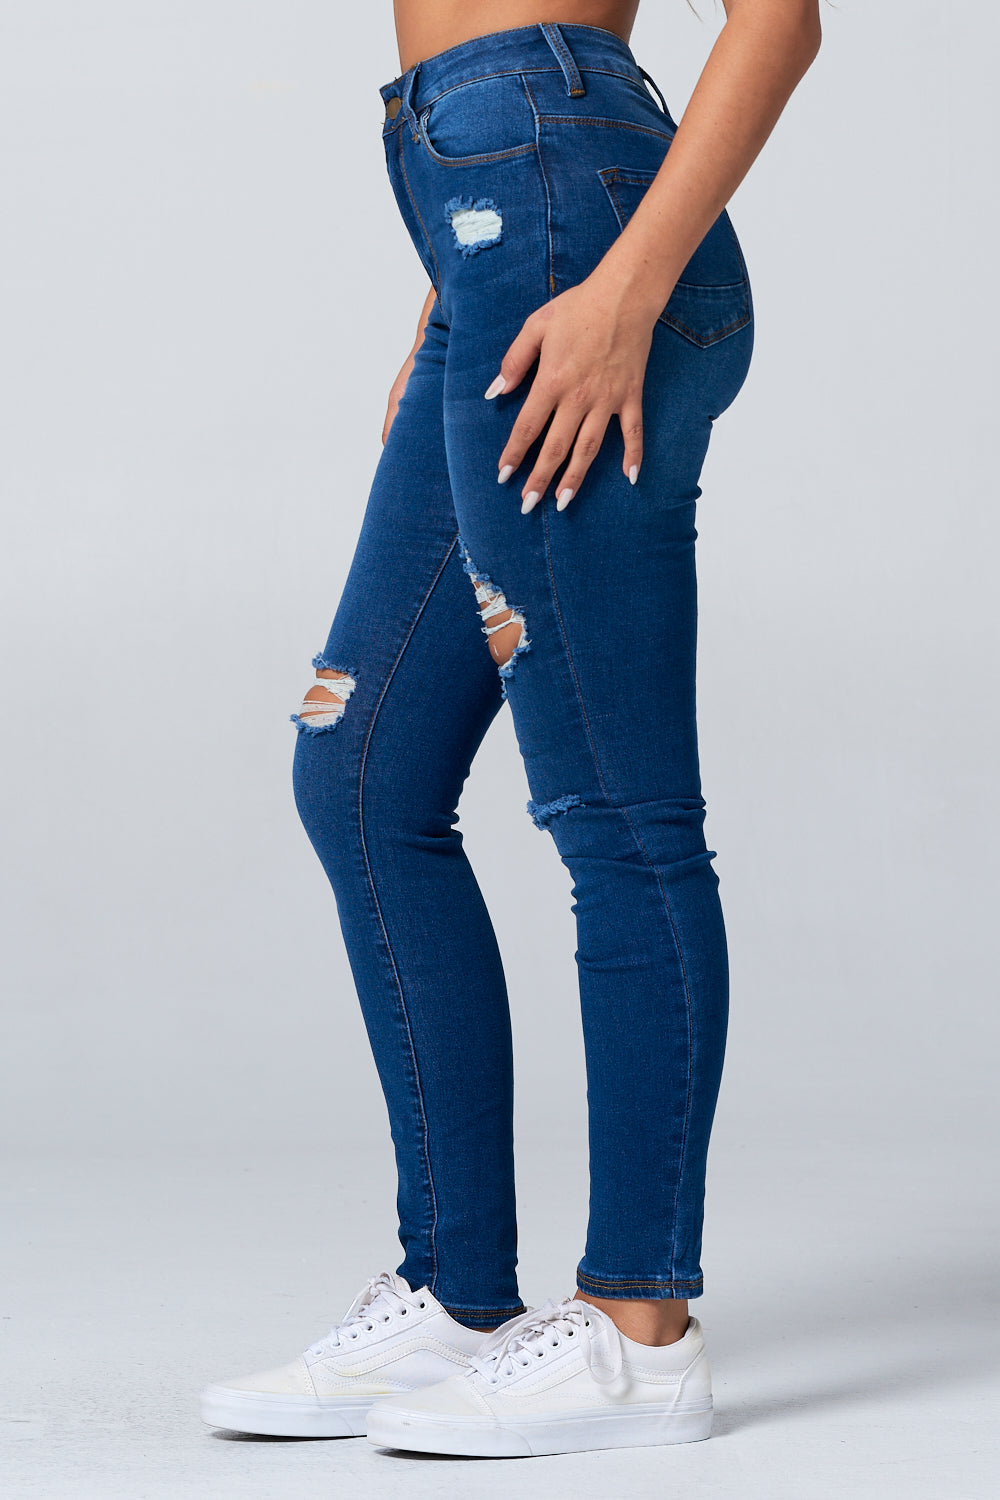 21 Latest Distressed or Torn Jeans Designs for Women (2022) - Tips and  Beauty | Womens ripped jeans, Women jeans, Ripped jeans style